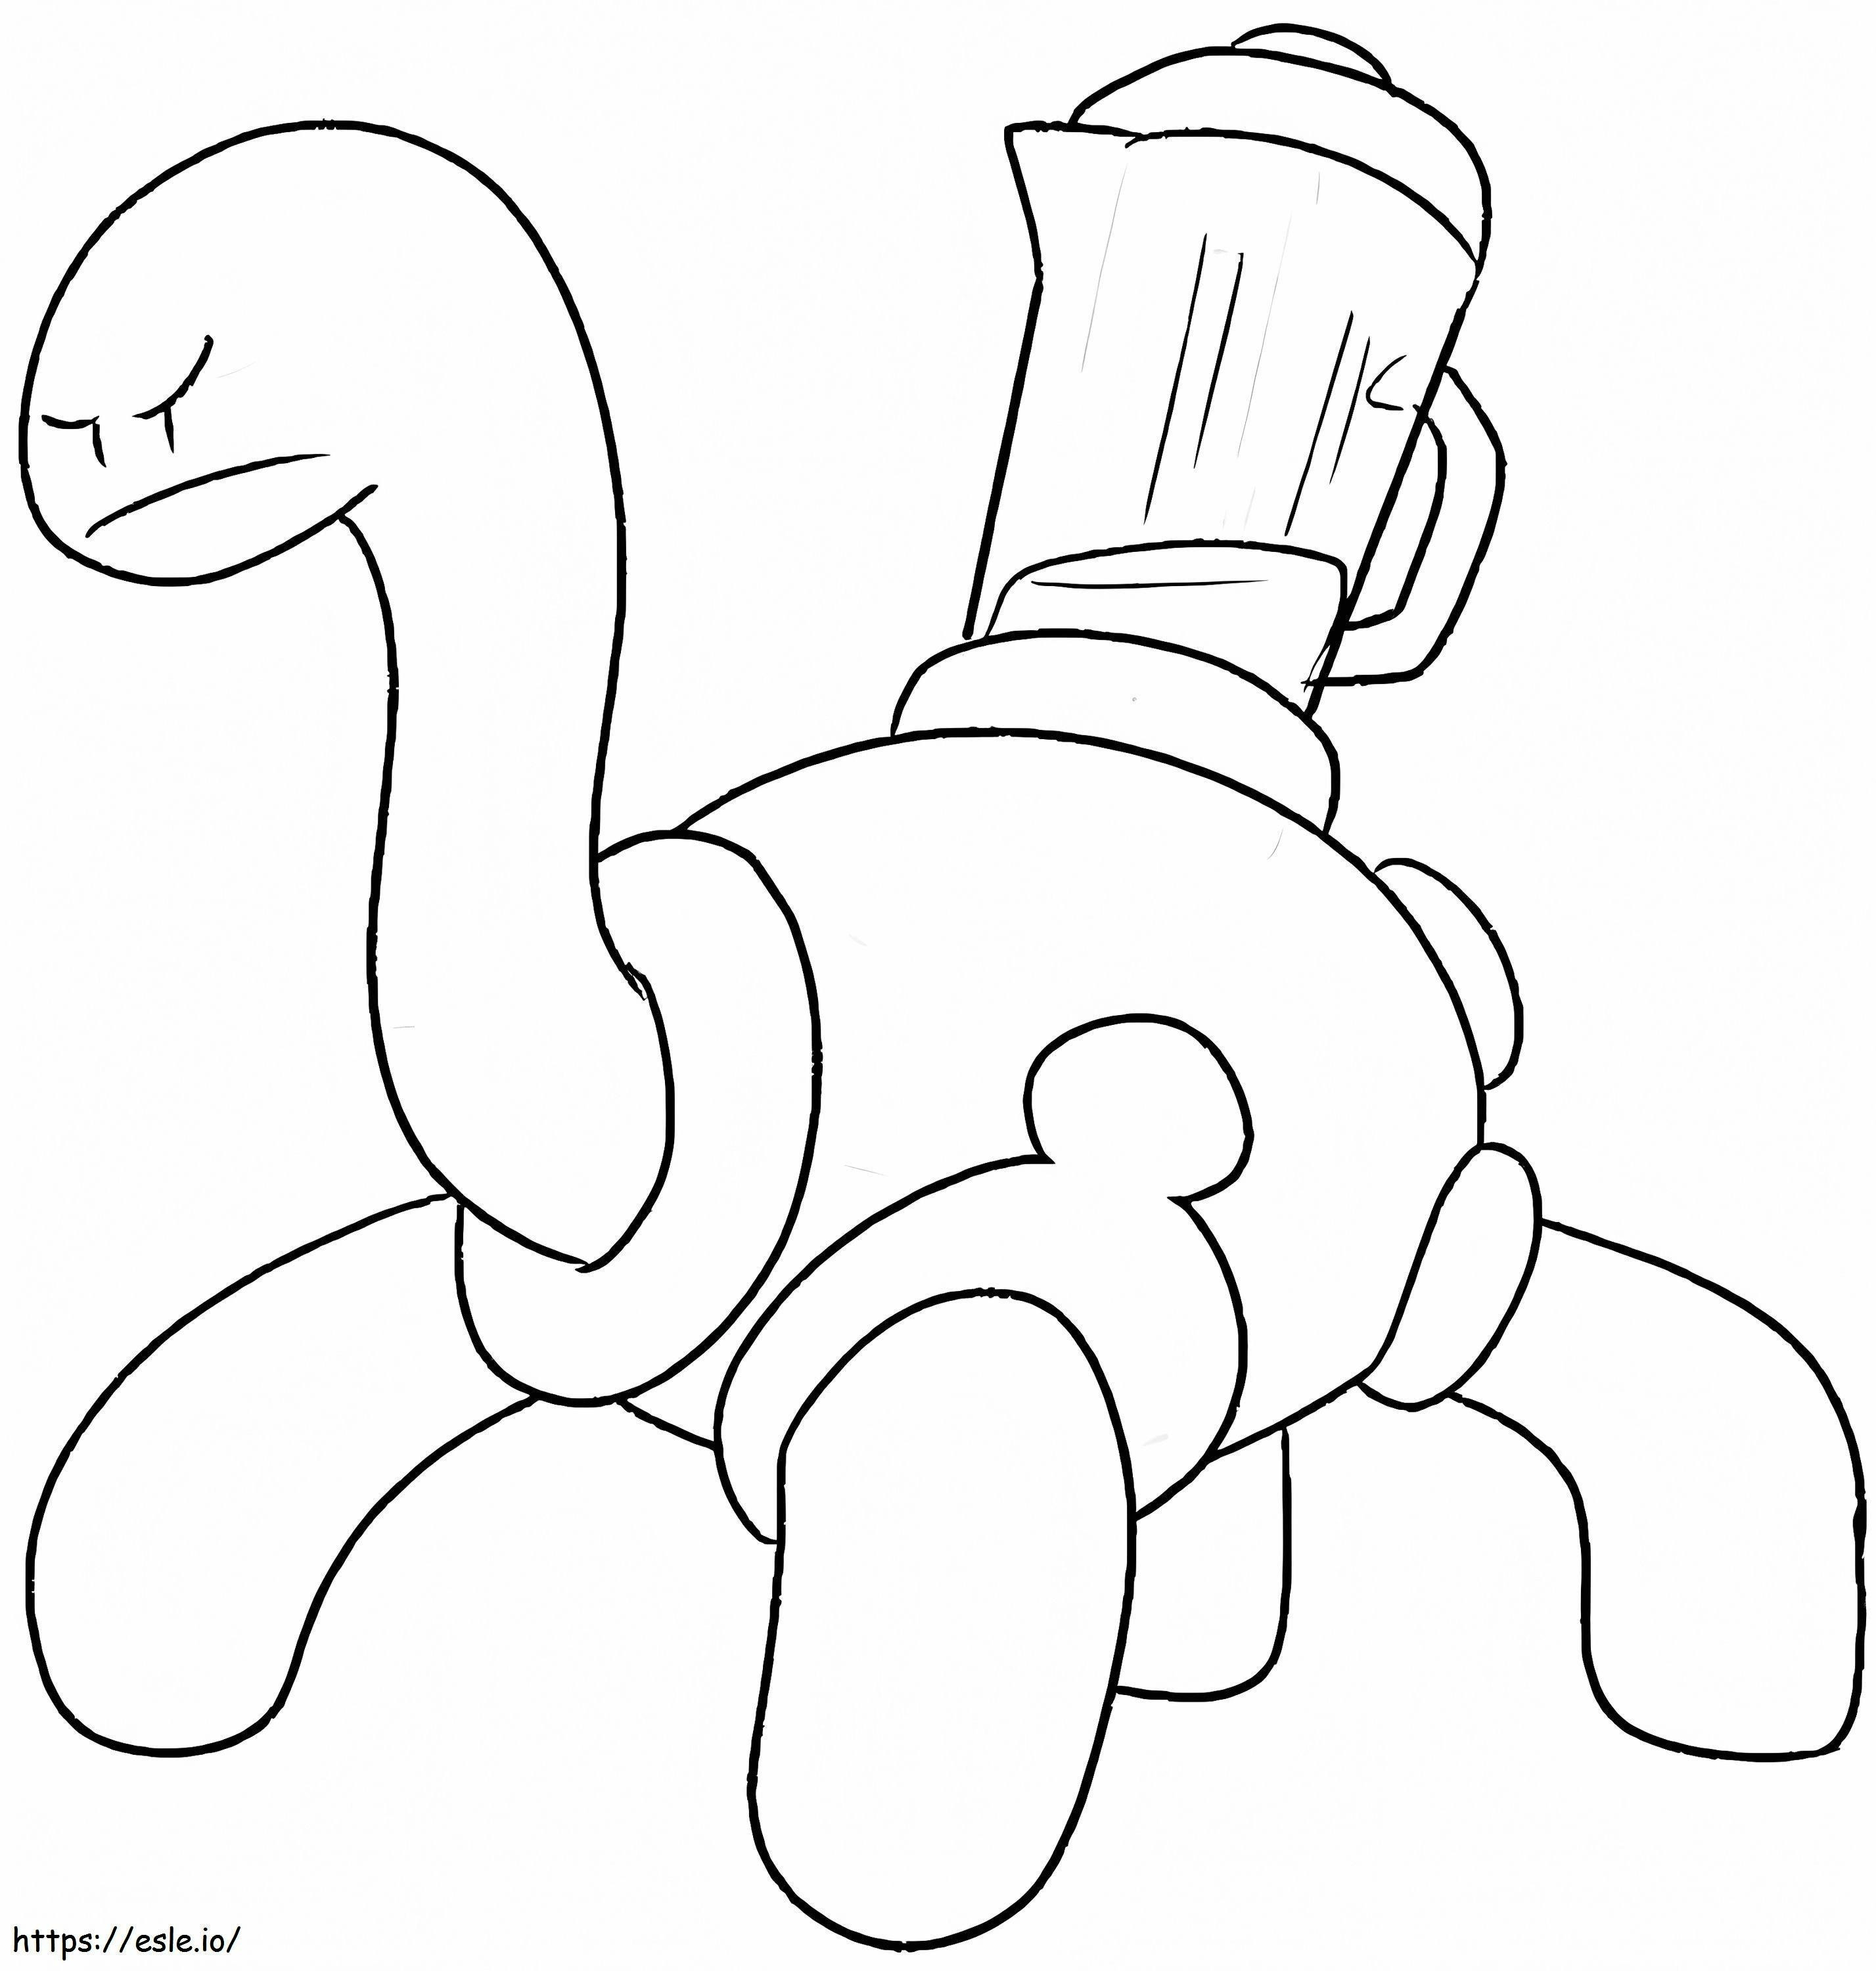 Free Shuckle coloring page